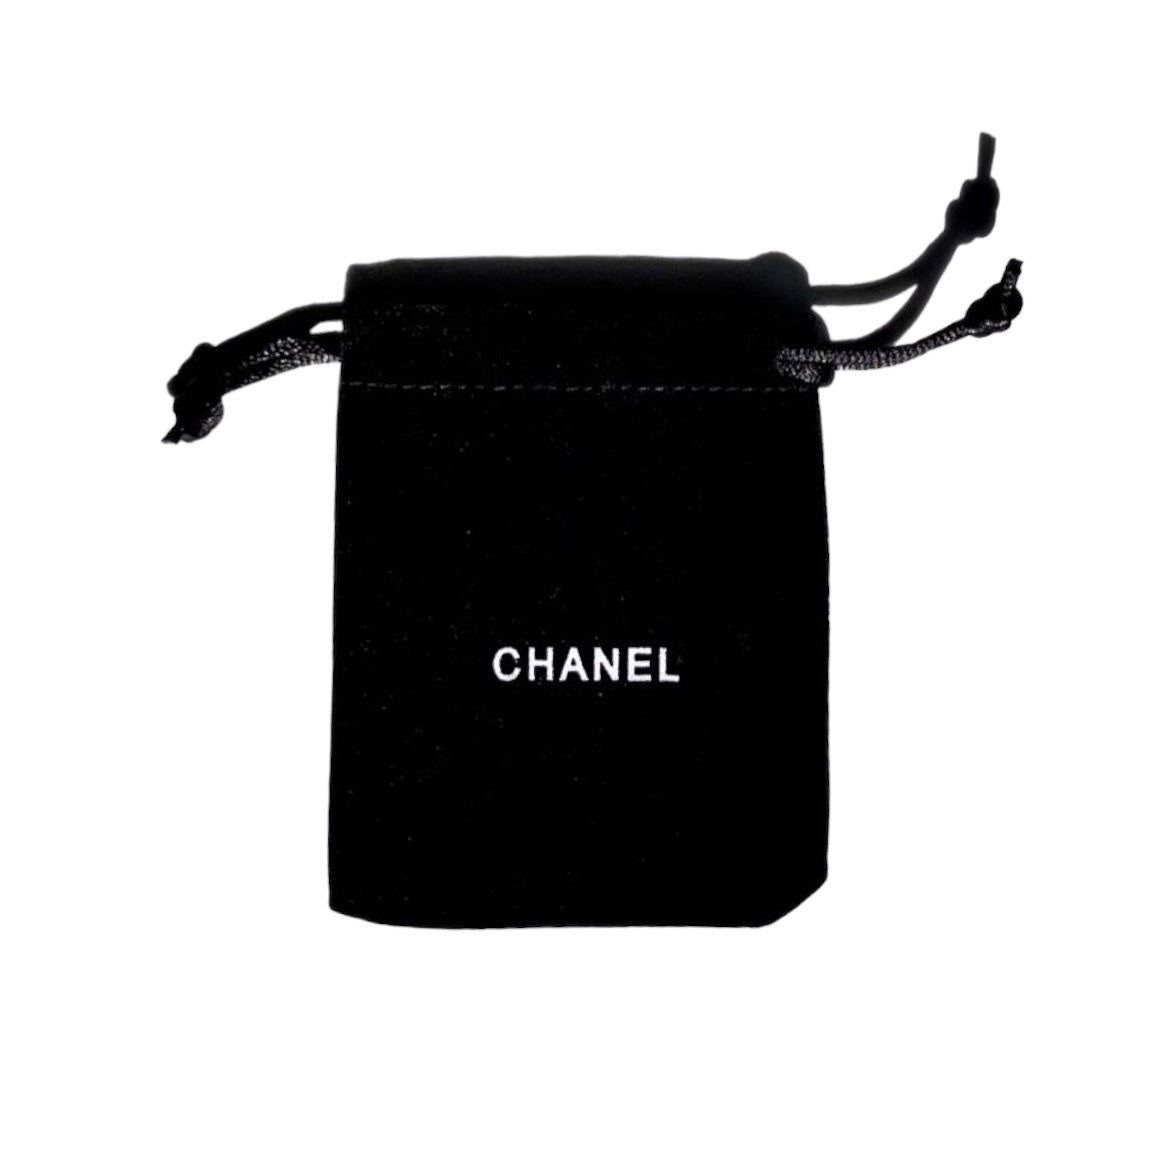 Chanel Jewelry Pouches – Glitzy Blings